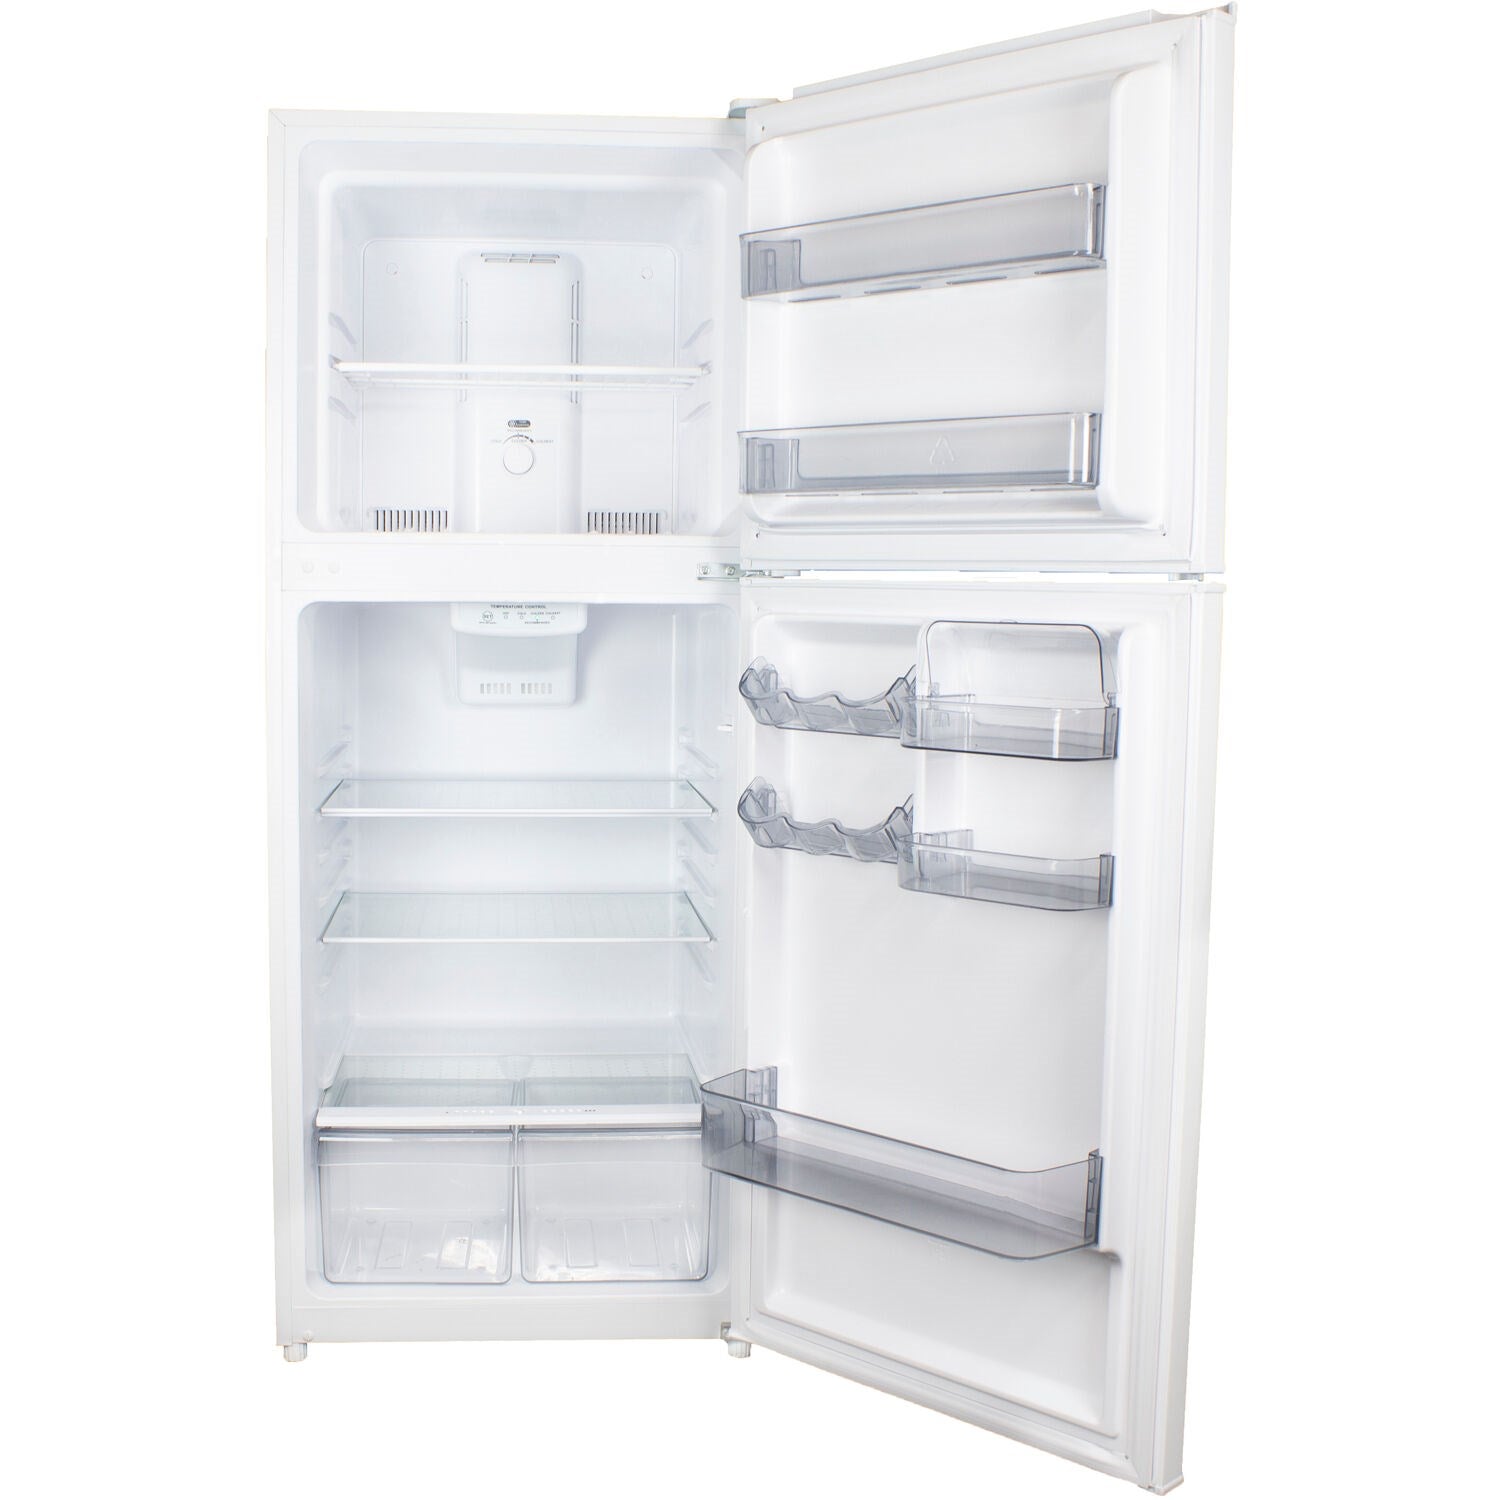 Danby - 10.1 CuFt. Top Mount Freezer, Frost Free, Crisper with Cover